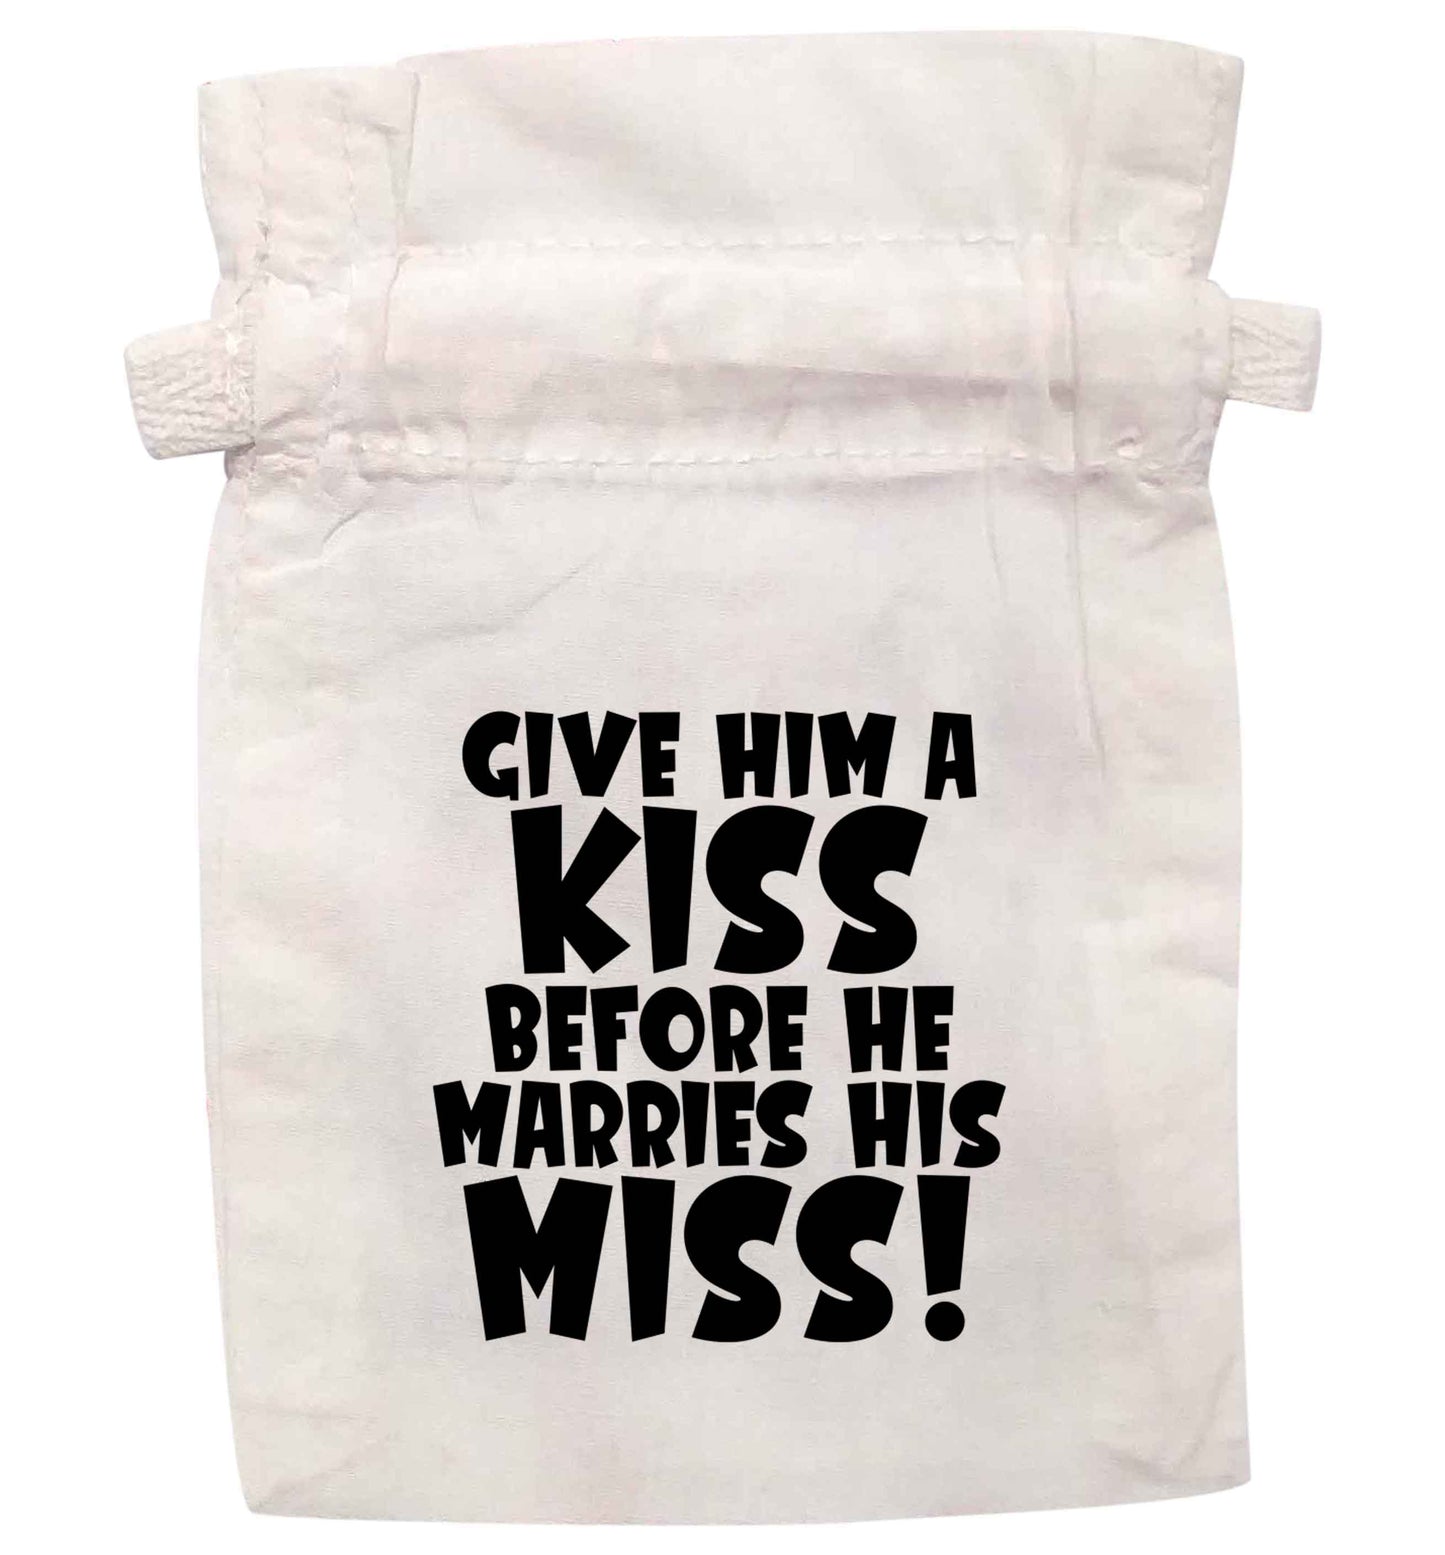 Give him a kiss before he marries his miss | XS - L | Pouch / Drawstring bag / Sack | Organic Cotton | Bulk discounts available!